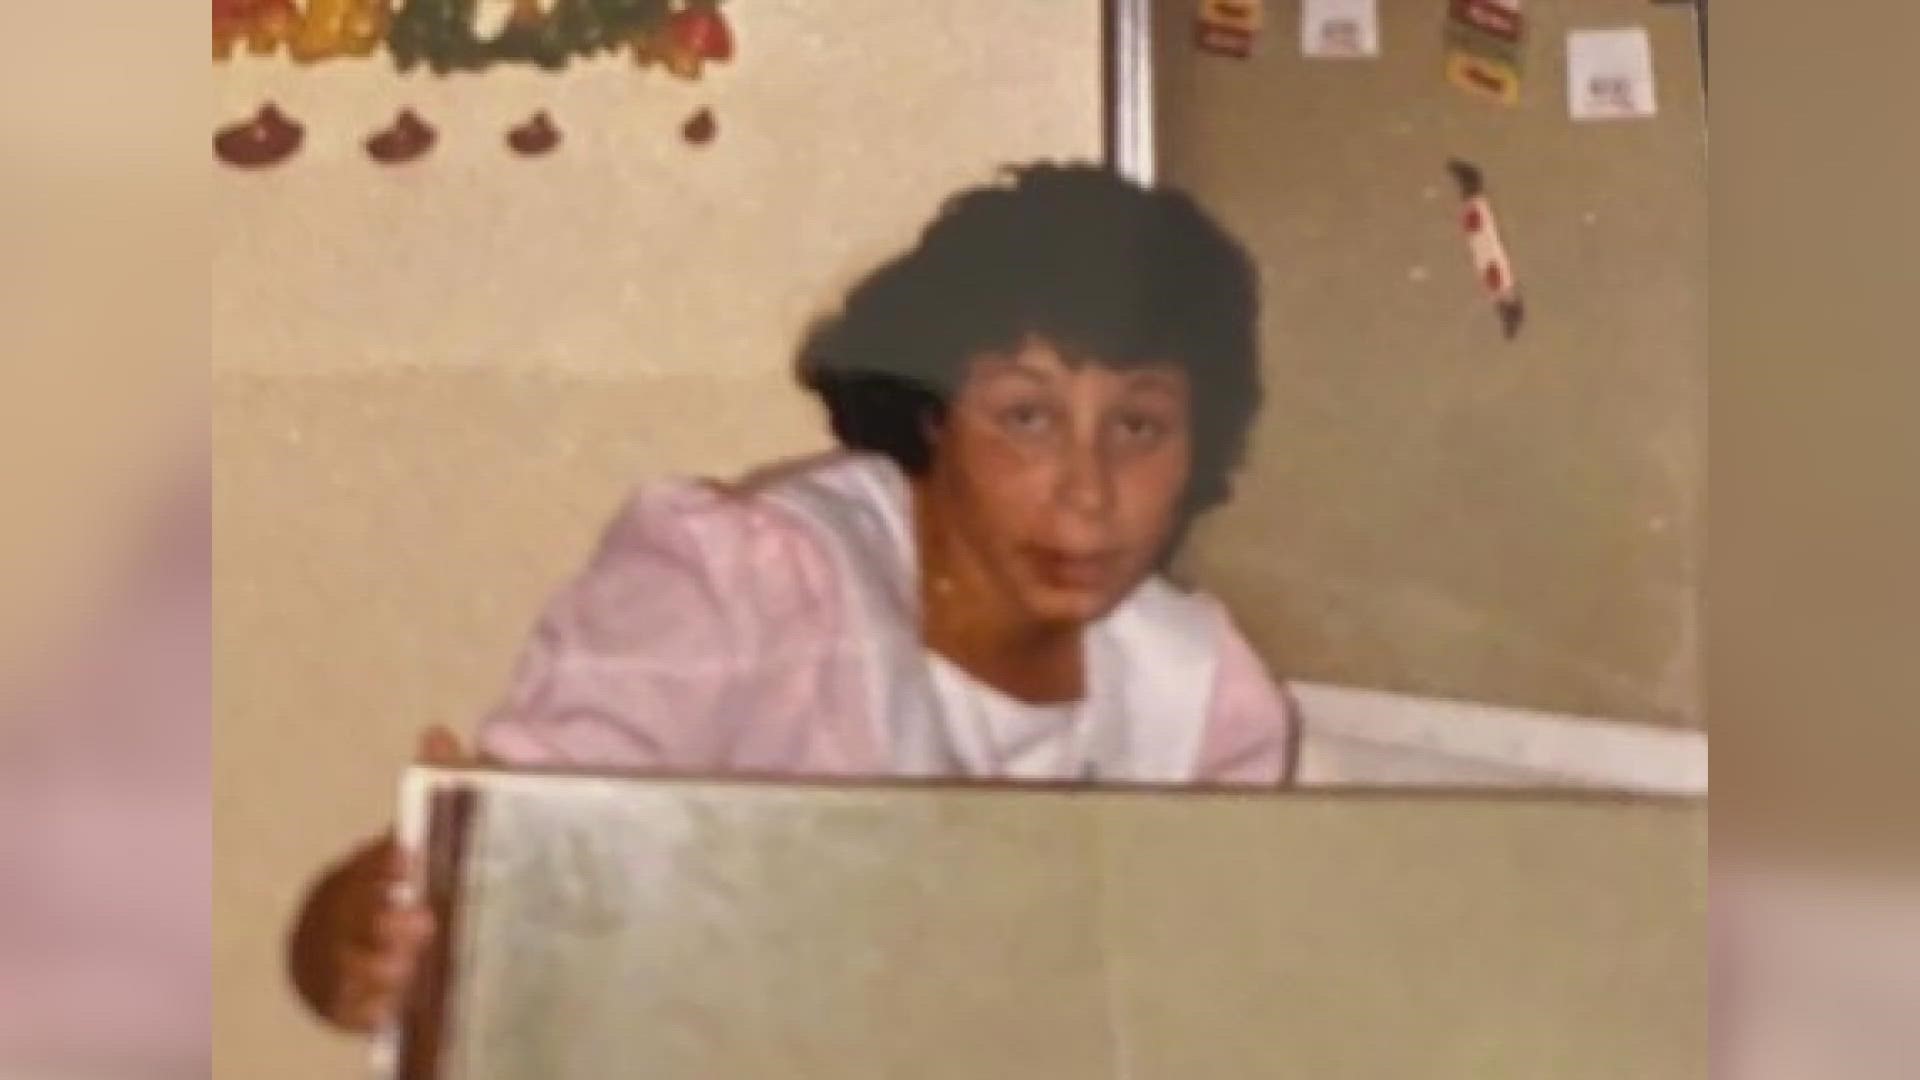 Marina Ramos and her two young daughters went missing in the late 1980s. Officials say a body found in Mohave County has been identified as belonging to Ramos.